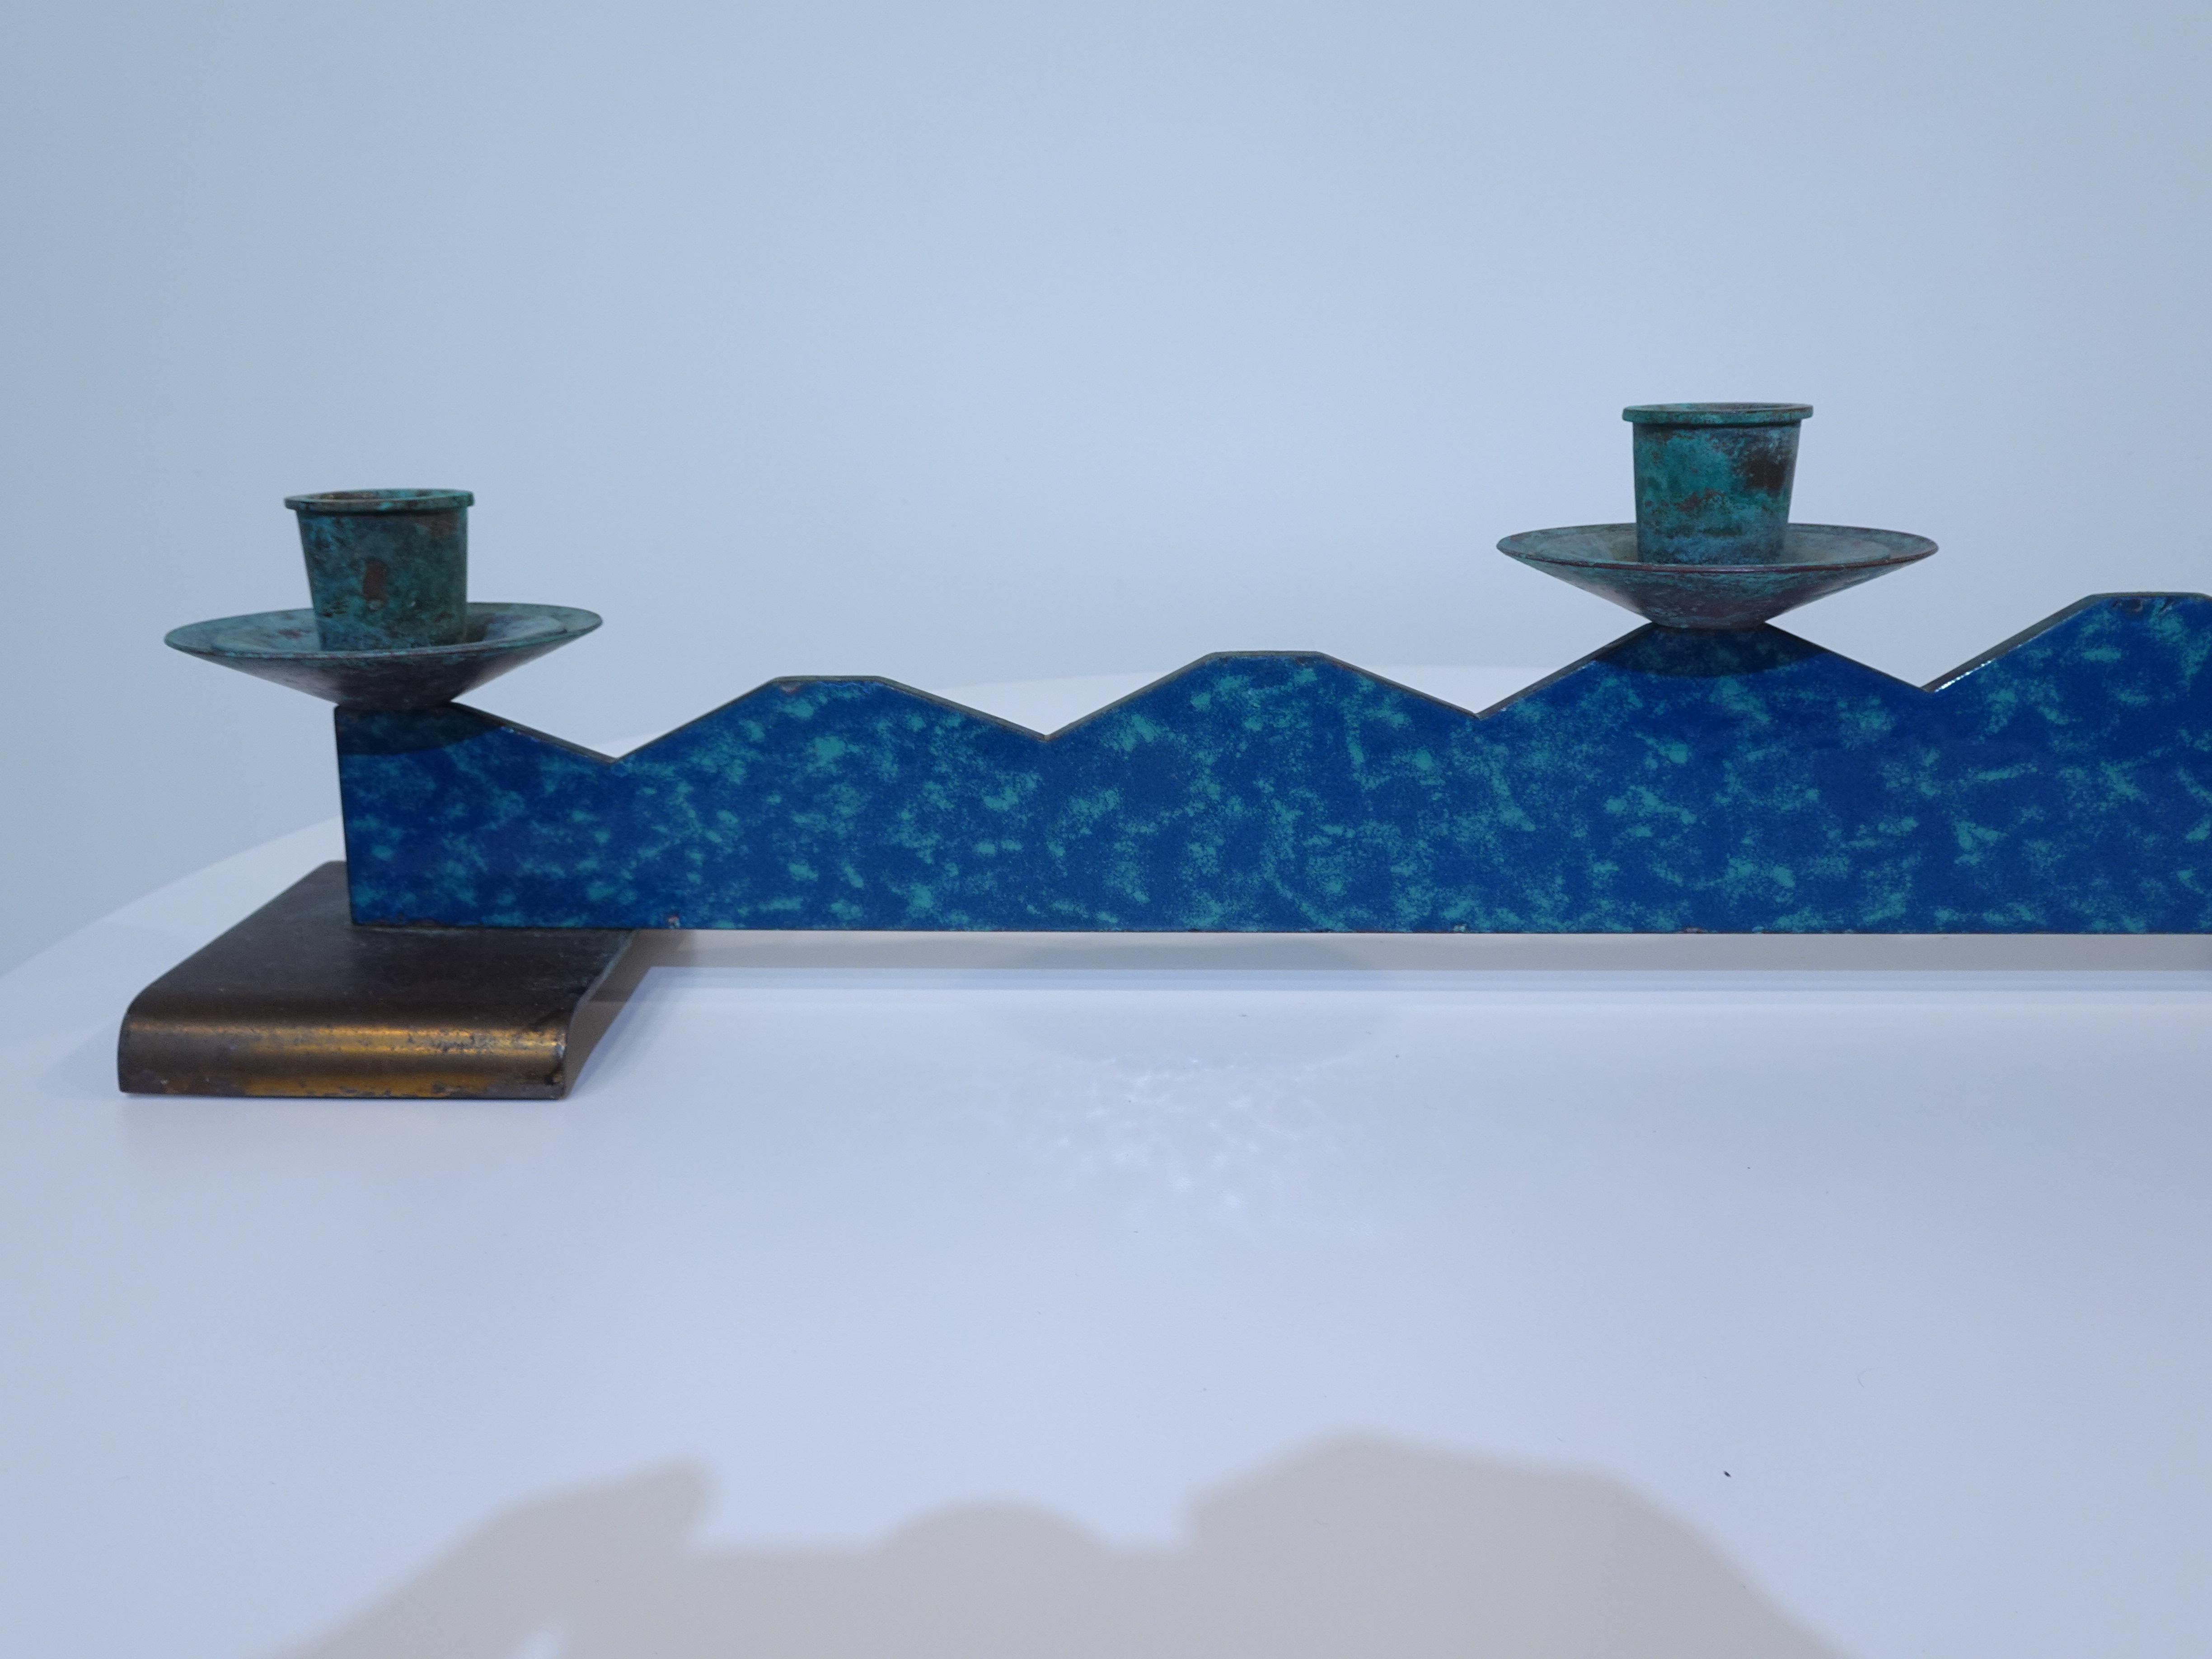 A well crafted candlestick center piece in a mixed blue toned copper enameled metal with step down design and three copper candle holders. The holders have great age and patina which complements the piece and the large platforms or feet which are on